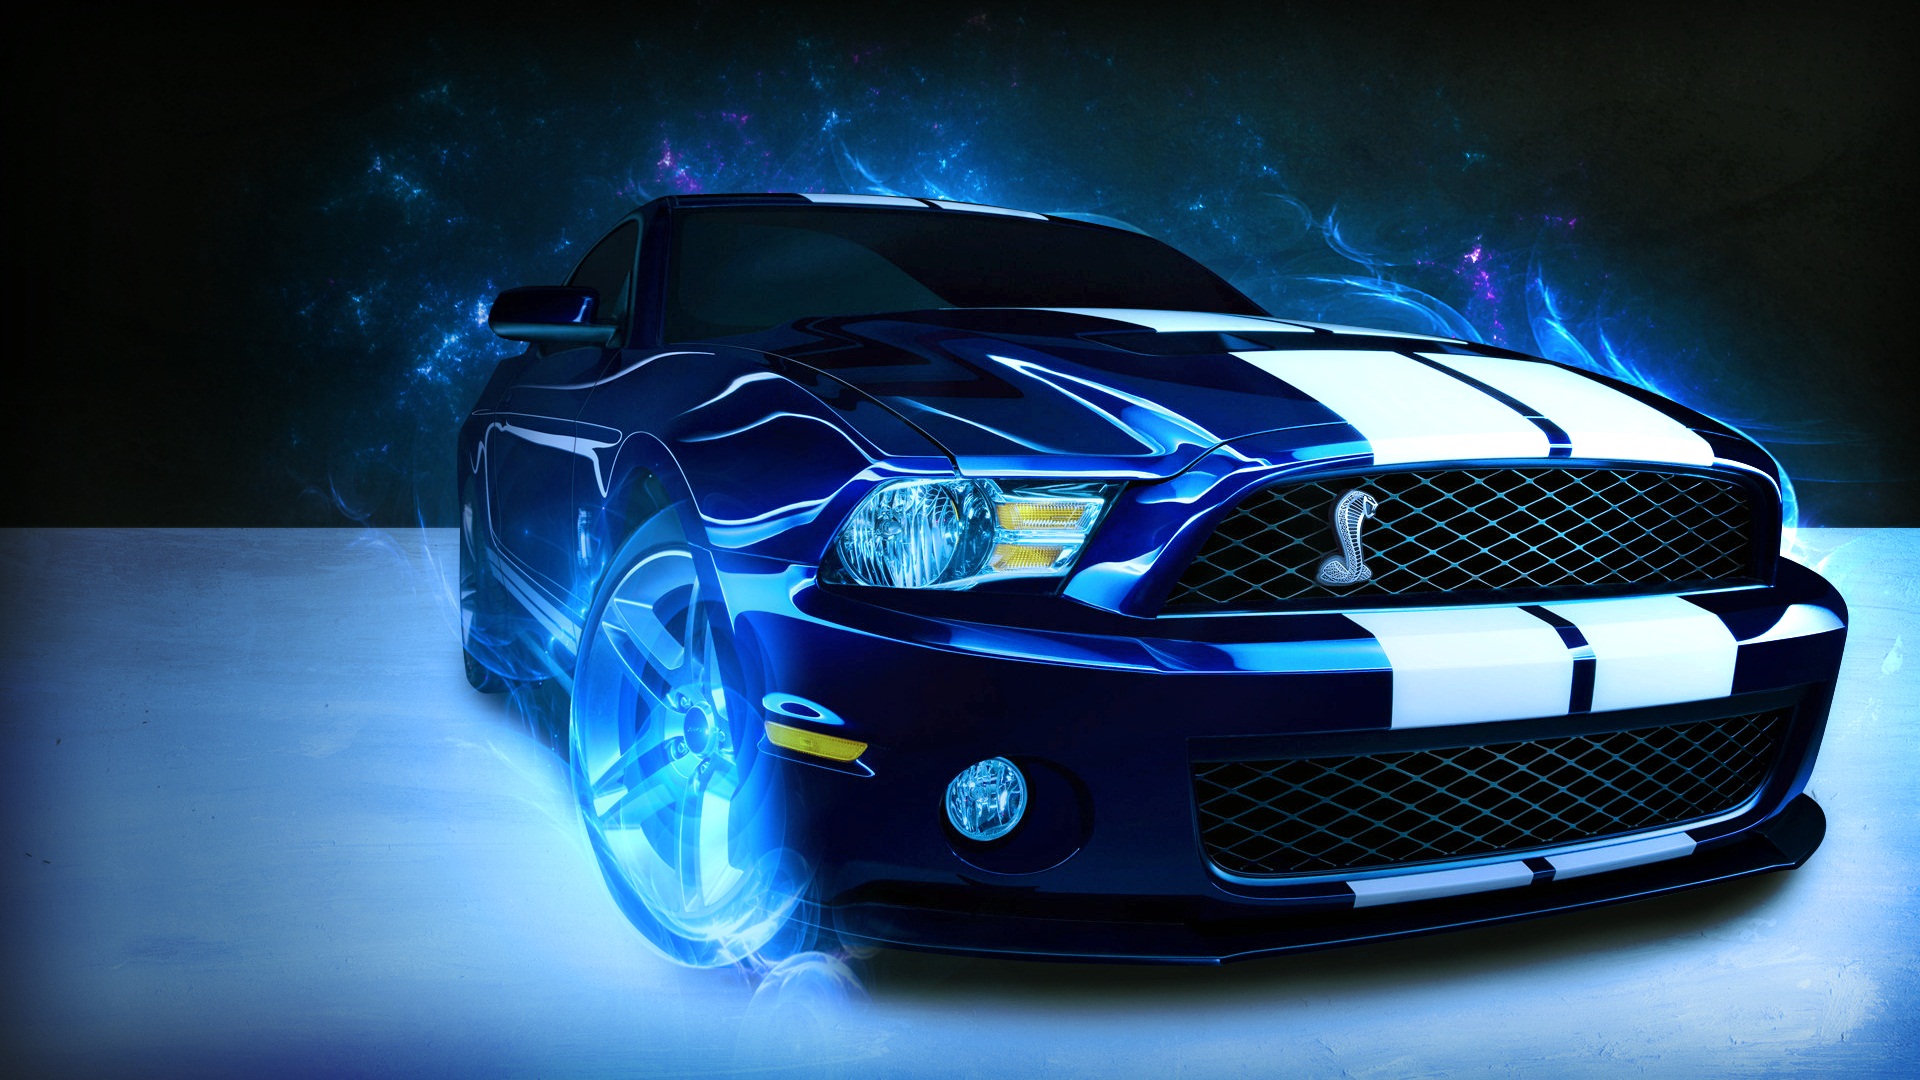 30 HD Mustang Wallpapers For Free Download.